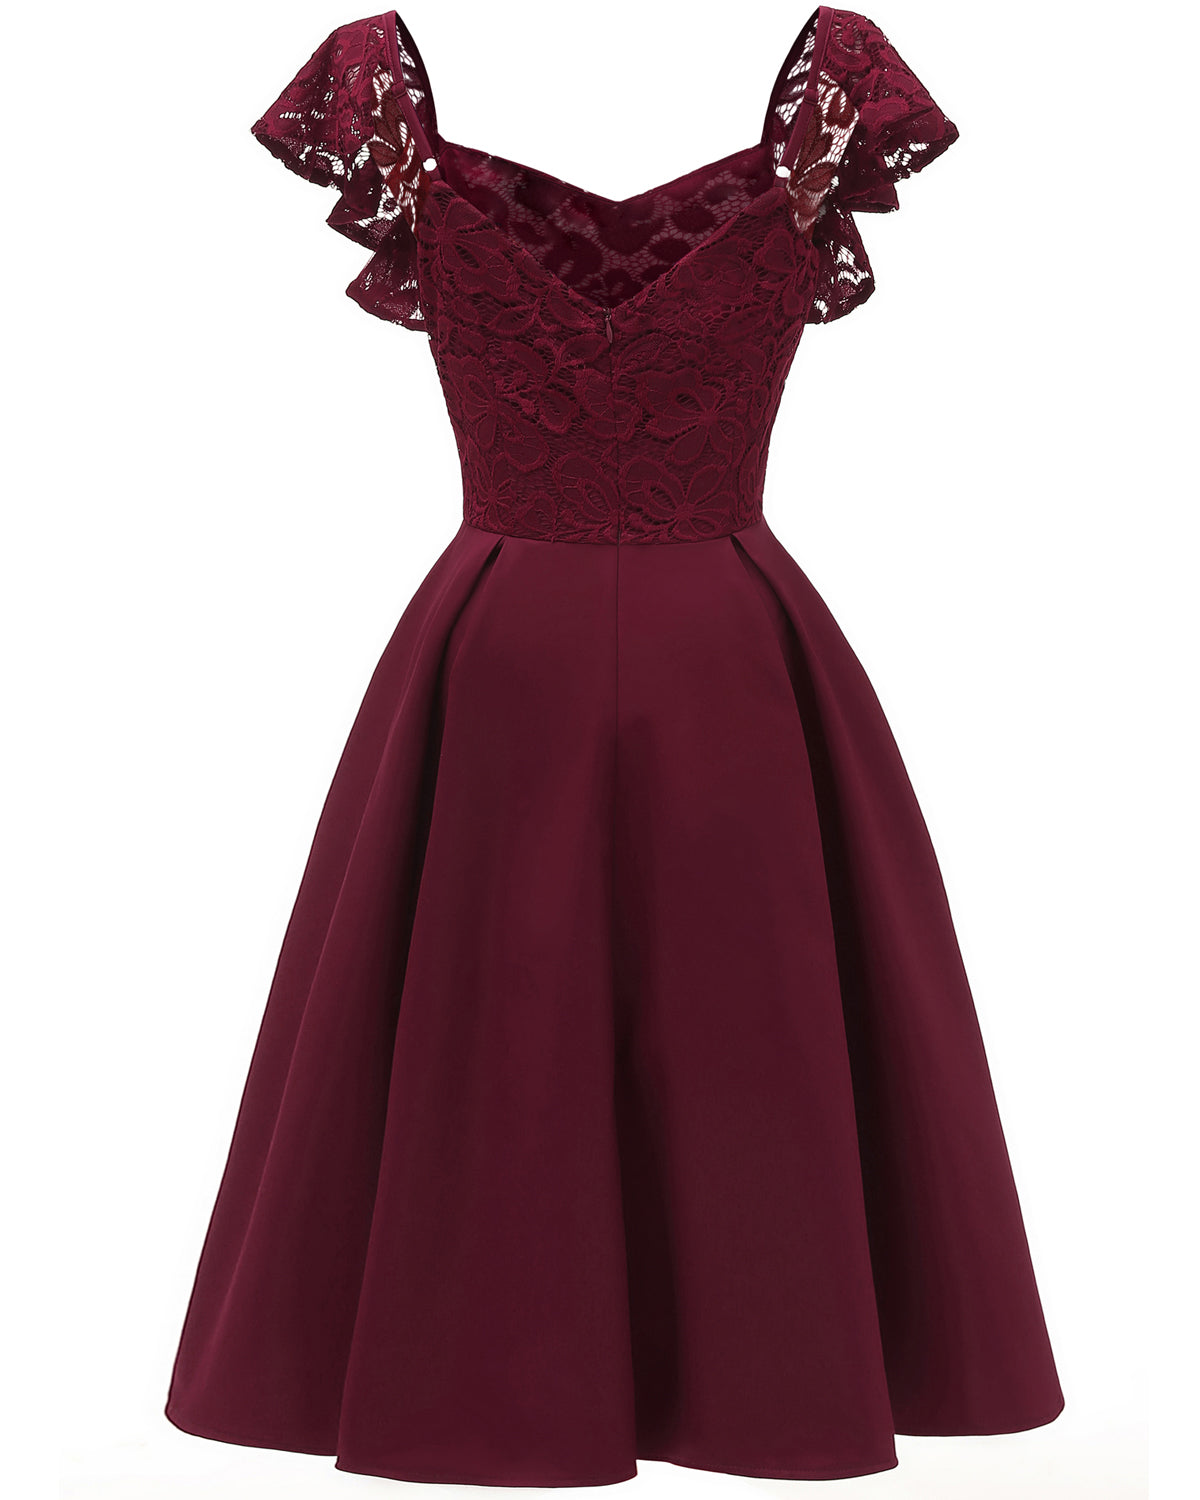 Luscious Short Maroon Prom Dress with Ruffle Straps Vintage 50s Short Bridesmaid Dresses 1626B-Dolly Gown